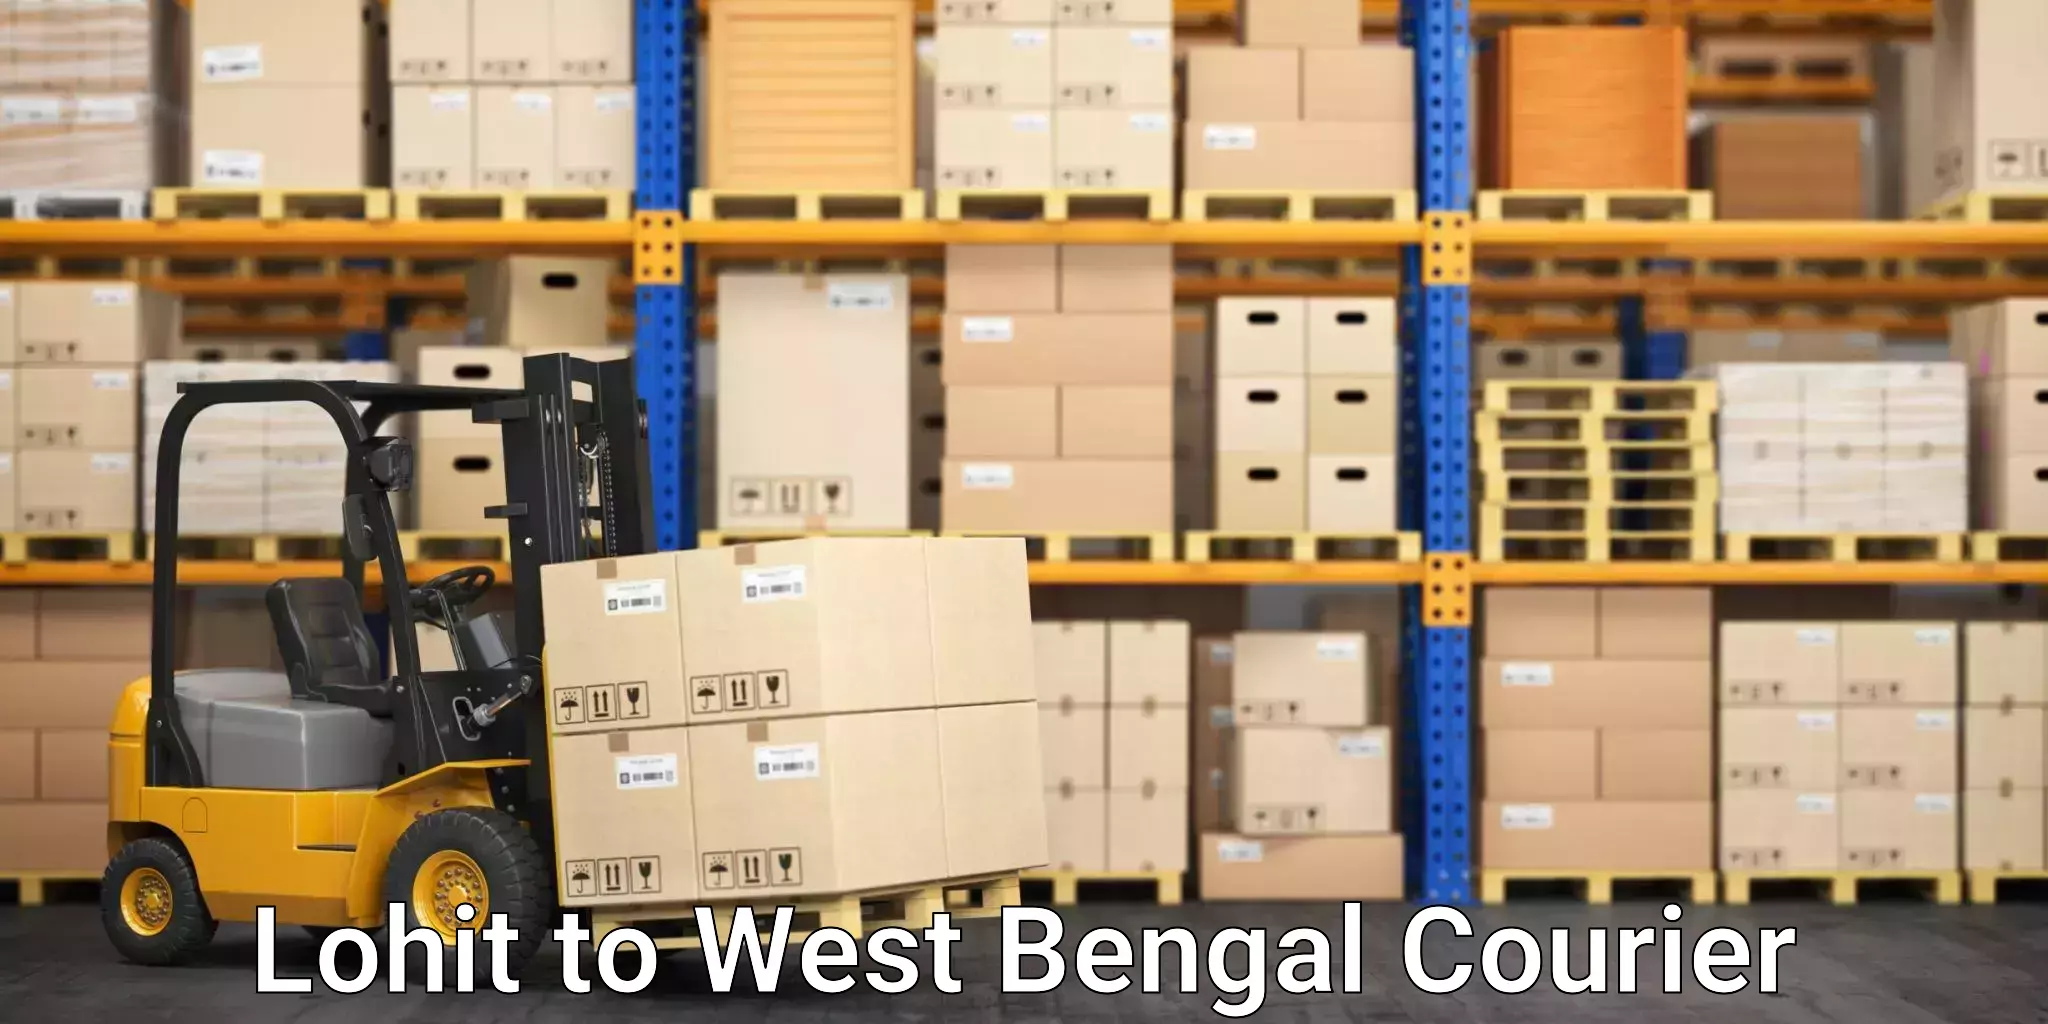 Courier app Lohit to West Bengal